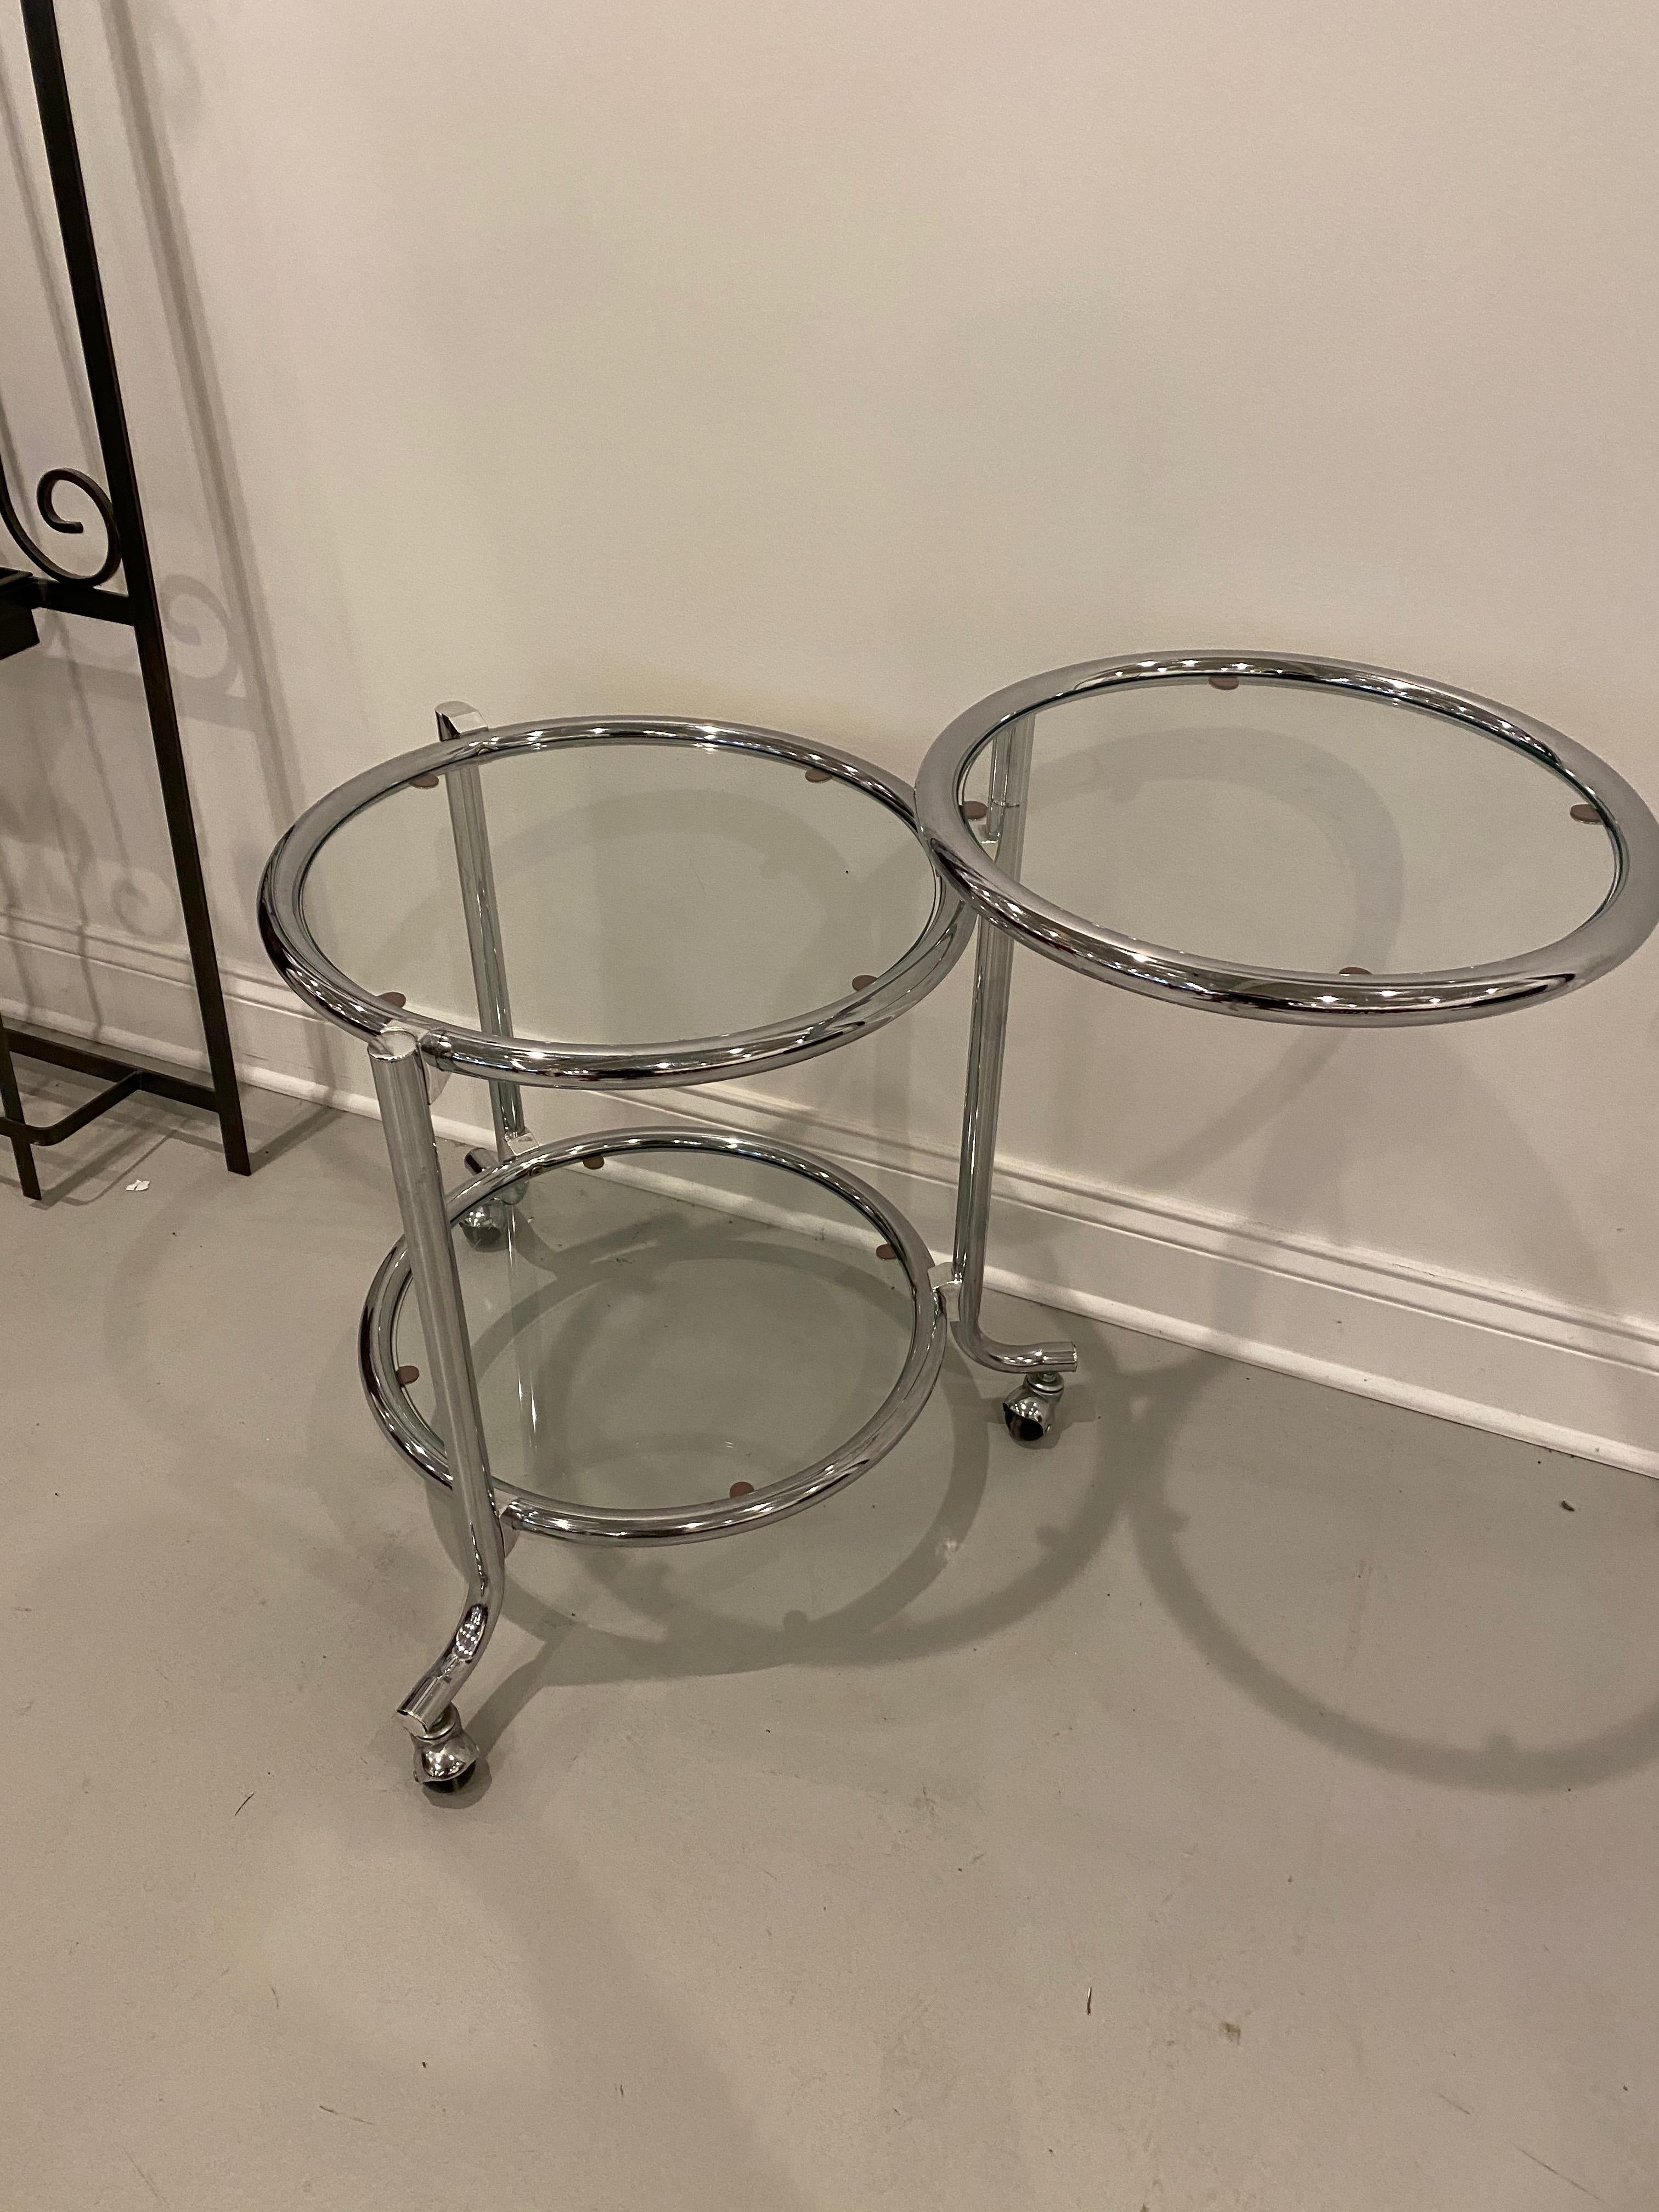 Modern three tiered glass side table. The top round glass tier swings 360 degrees.